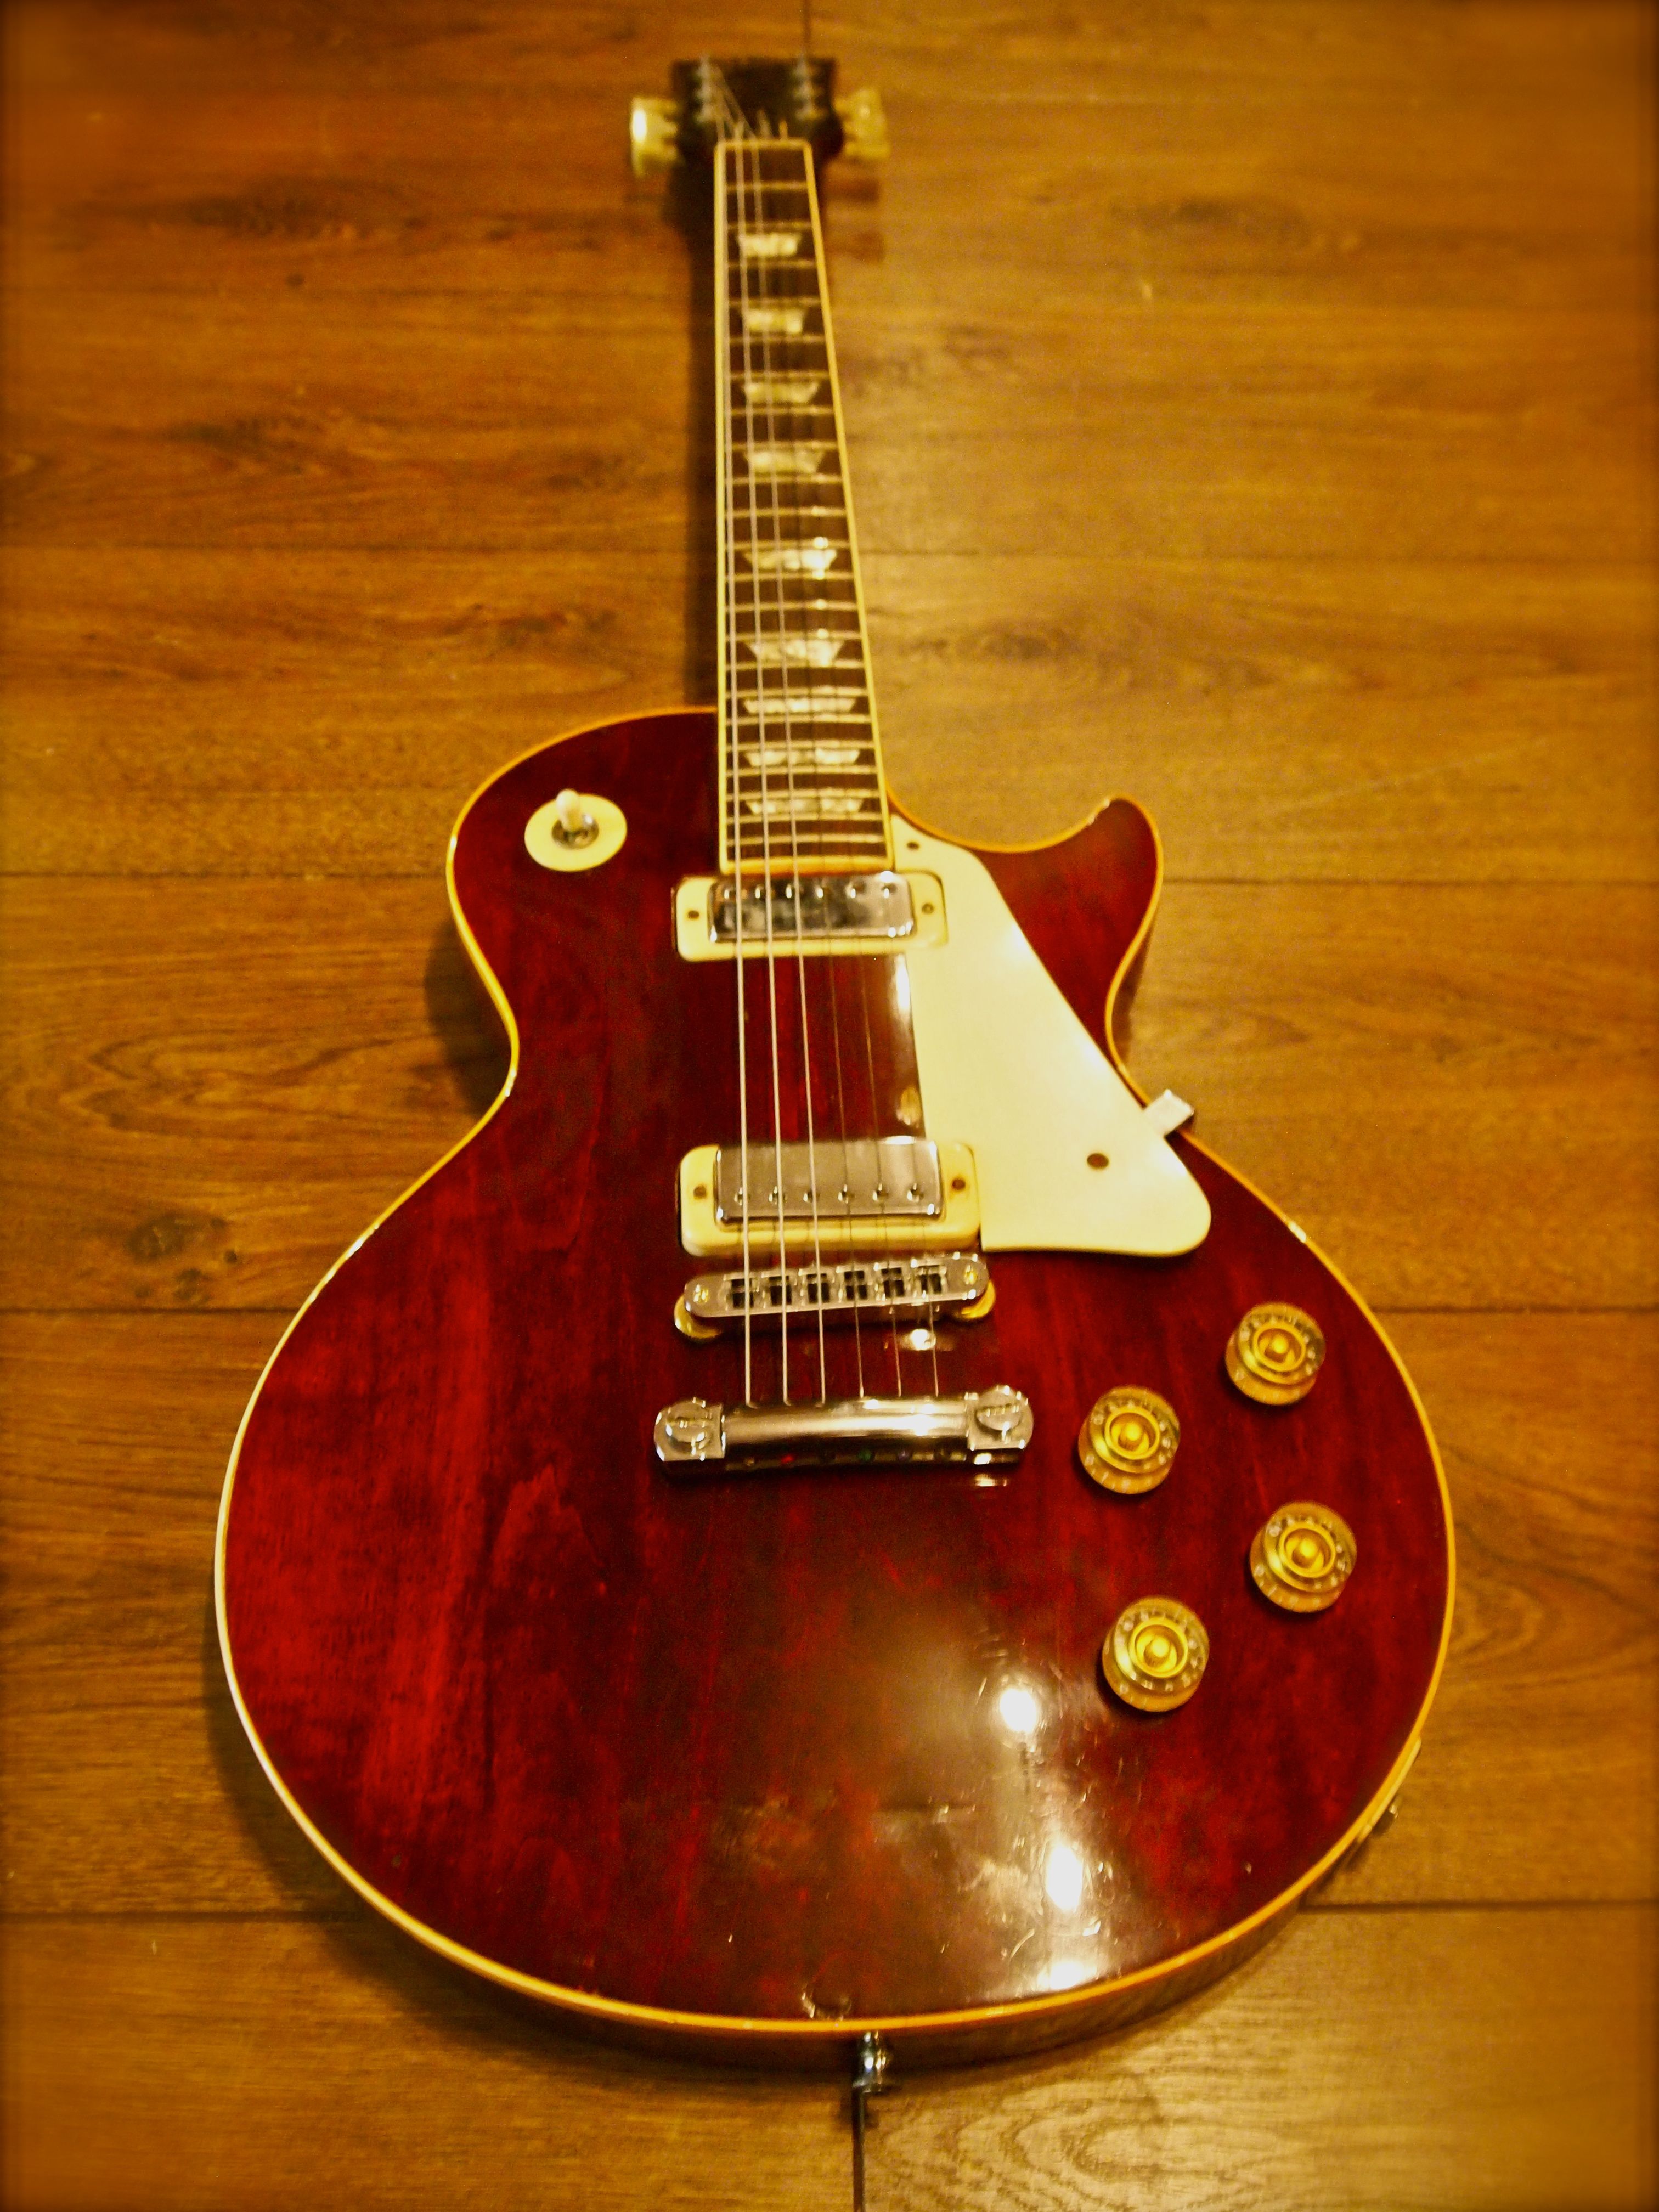 Gibson Les Paul Deluxe 1970's Wine Red Guitar For Sale Beat It Music3024 x 4032